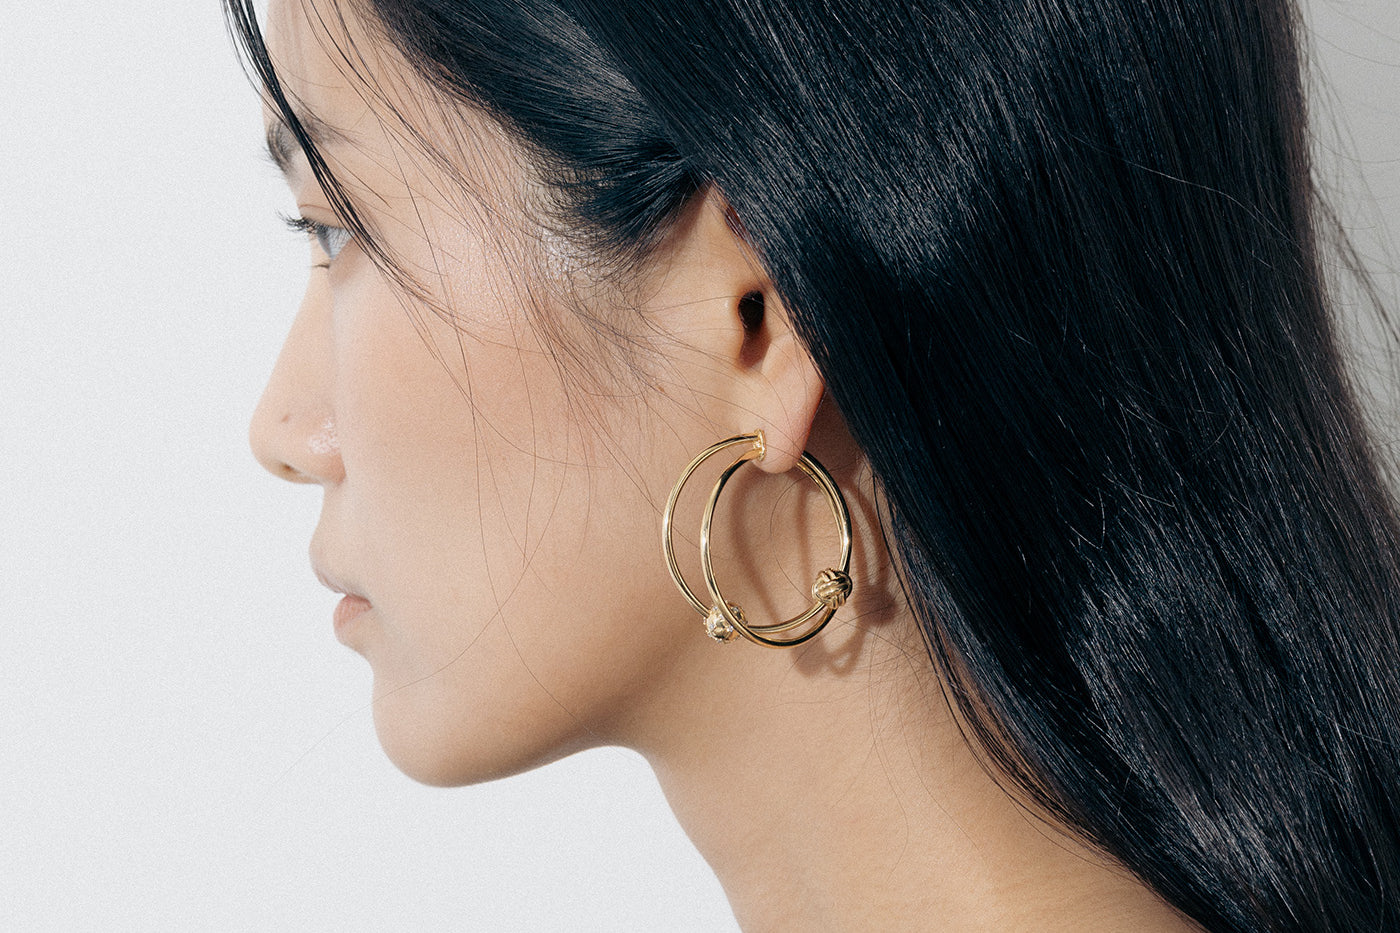 Yellow Gold earrings with linked hoops, a macrame knot, and a Diamond encrusted ball - Model shot